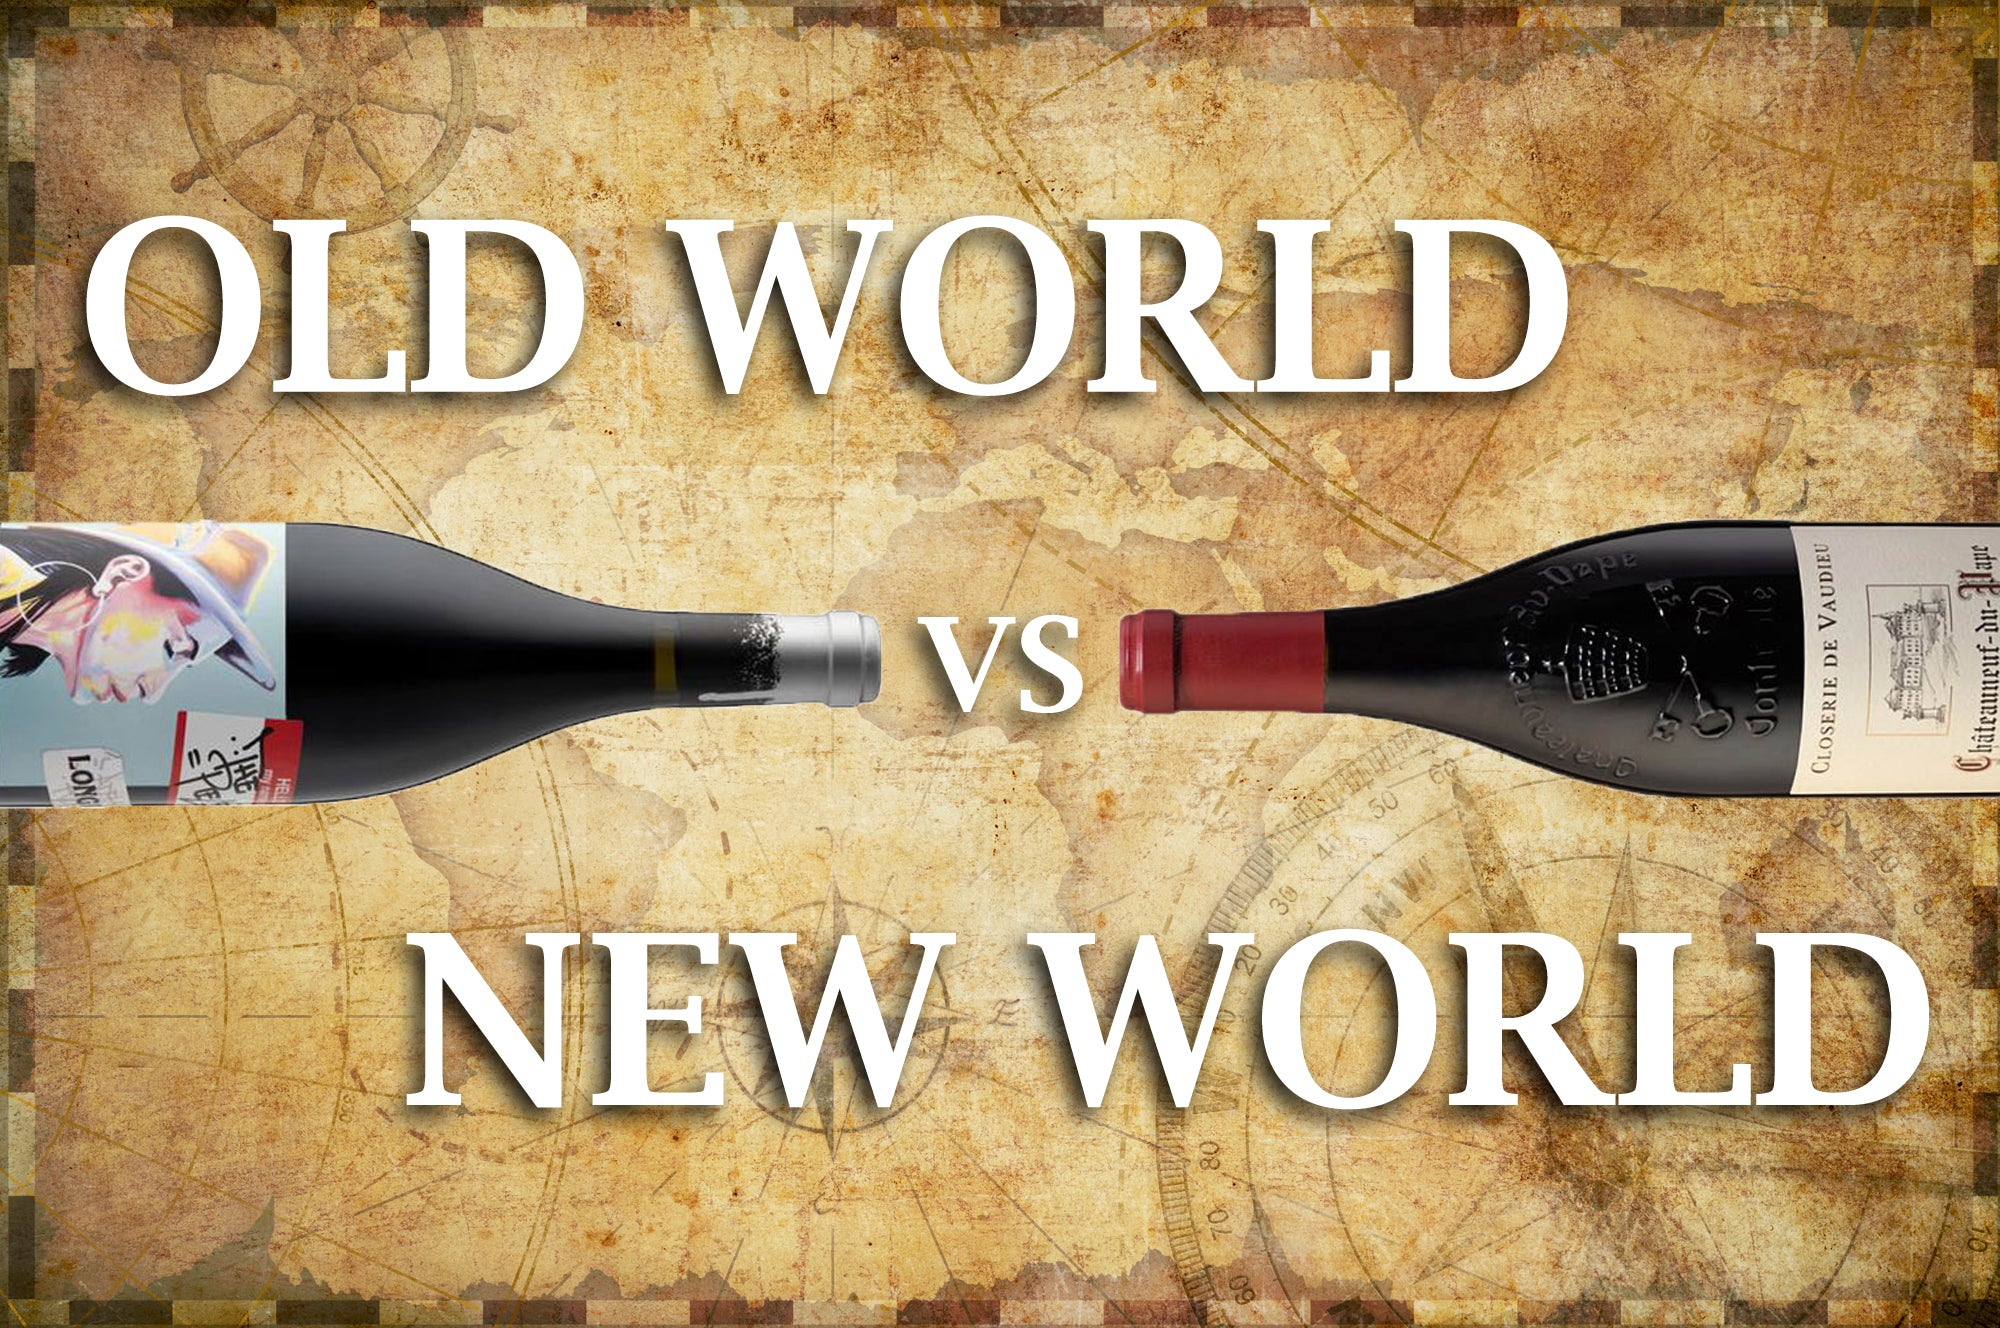 Real Differences: New World vs Old World Wine